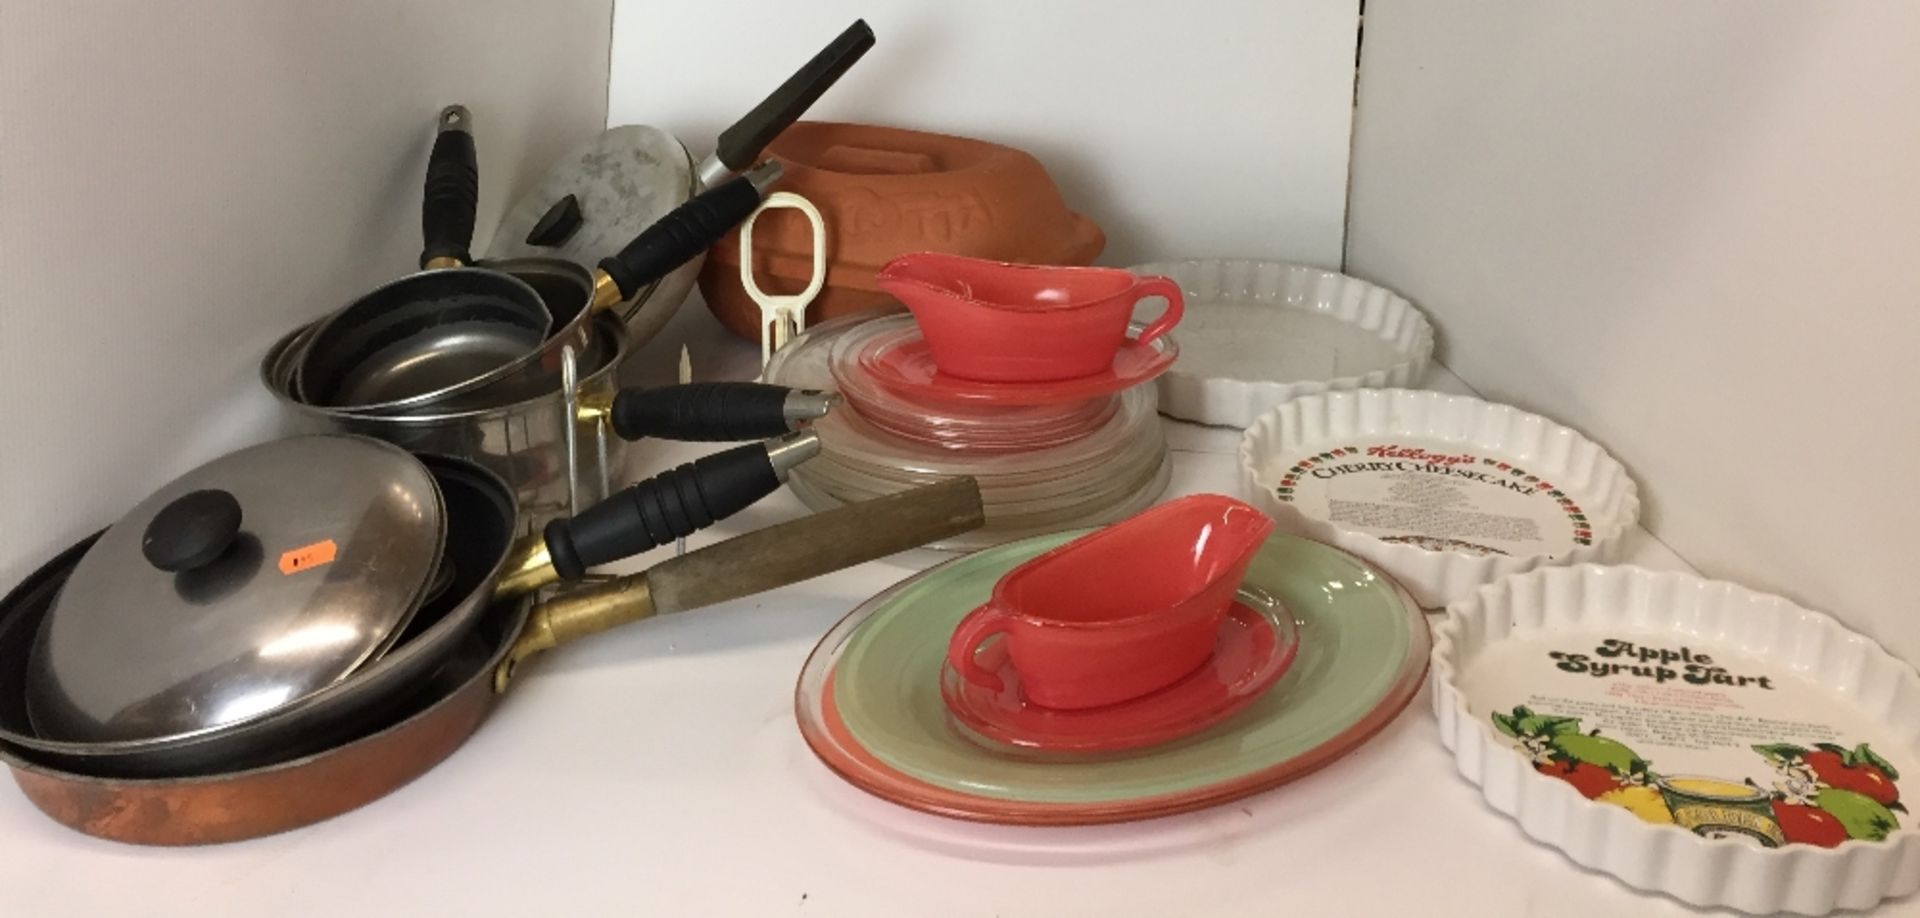 Twenty plus items including thirteen glass oven to tableware plates and gravy boats,